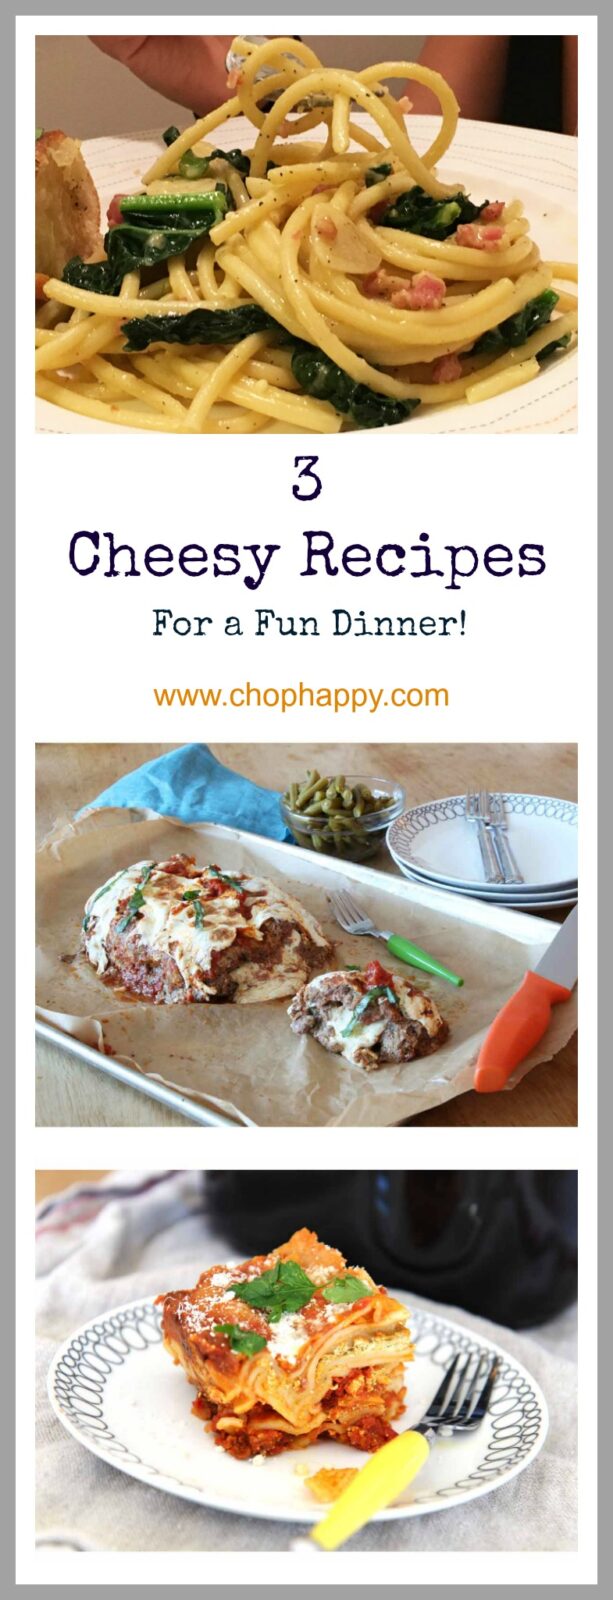 Whats For Dinner? Recipes- 3 cheesy recipes that willl make the whole family smile. The best part are they are all super easy to make. I www.ChopHappy.com